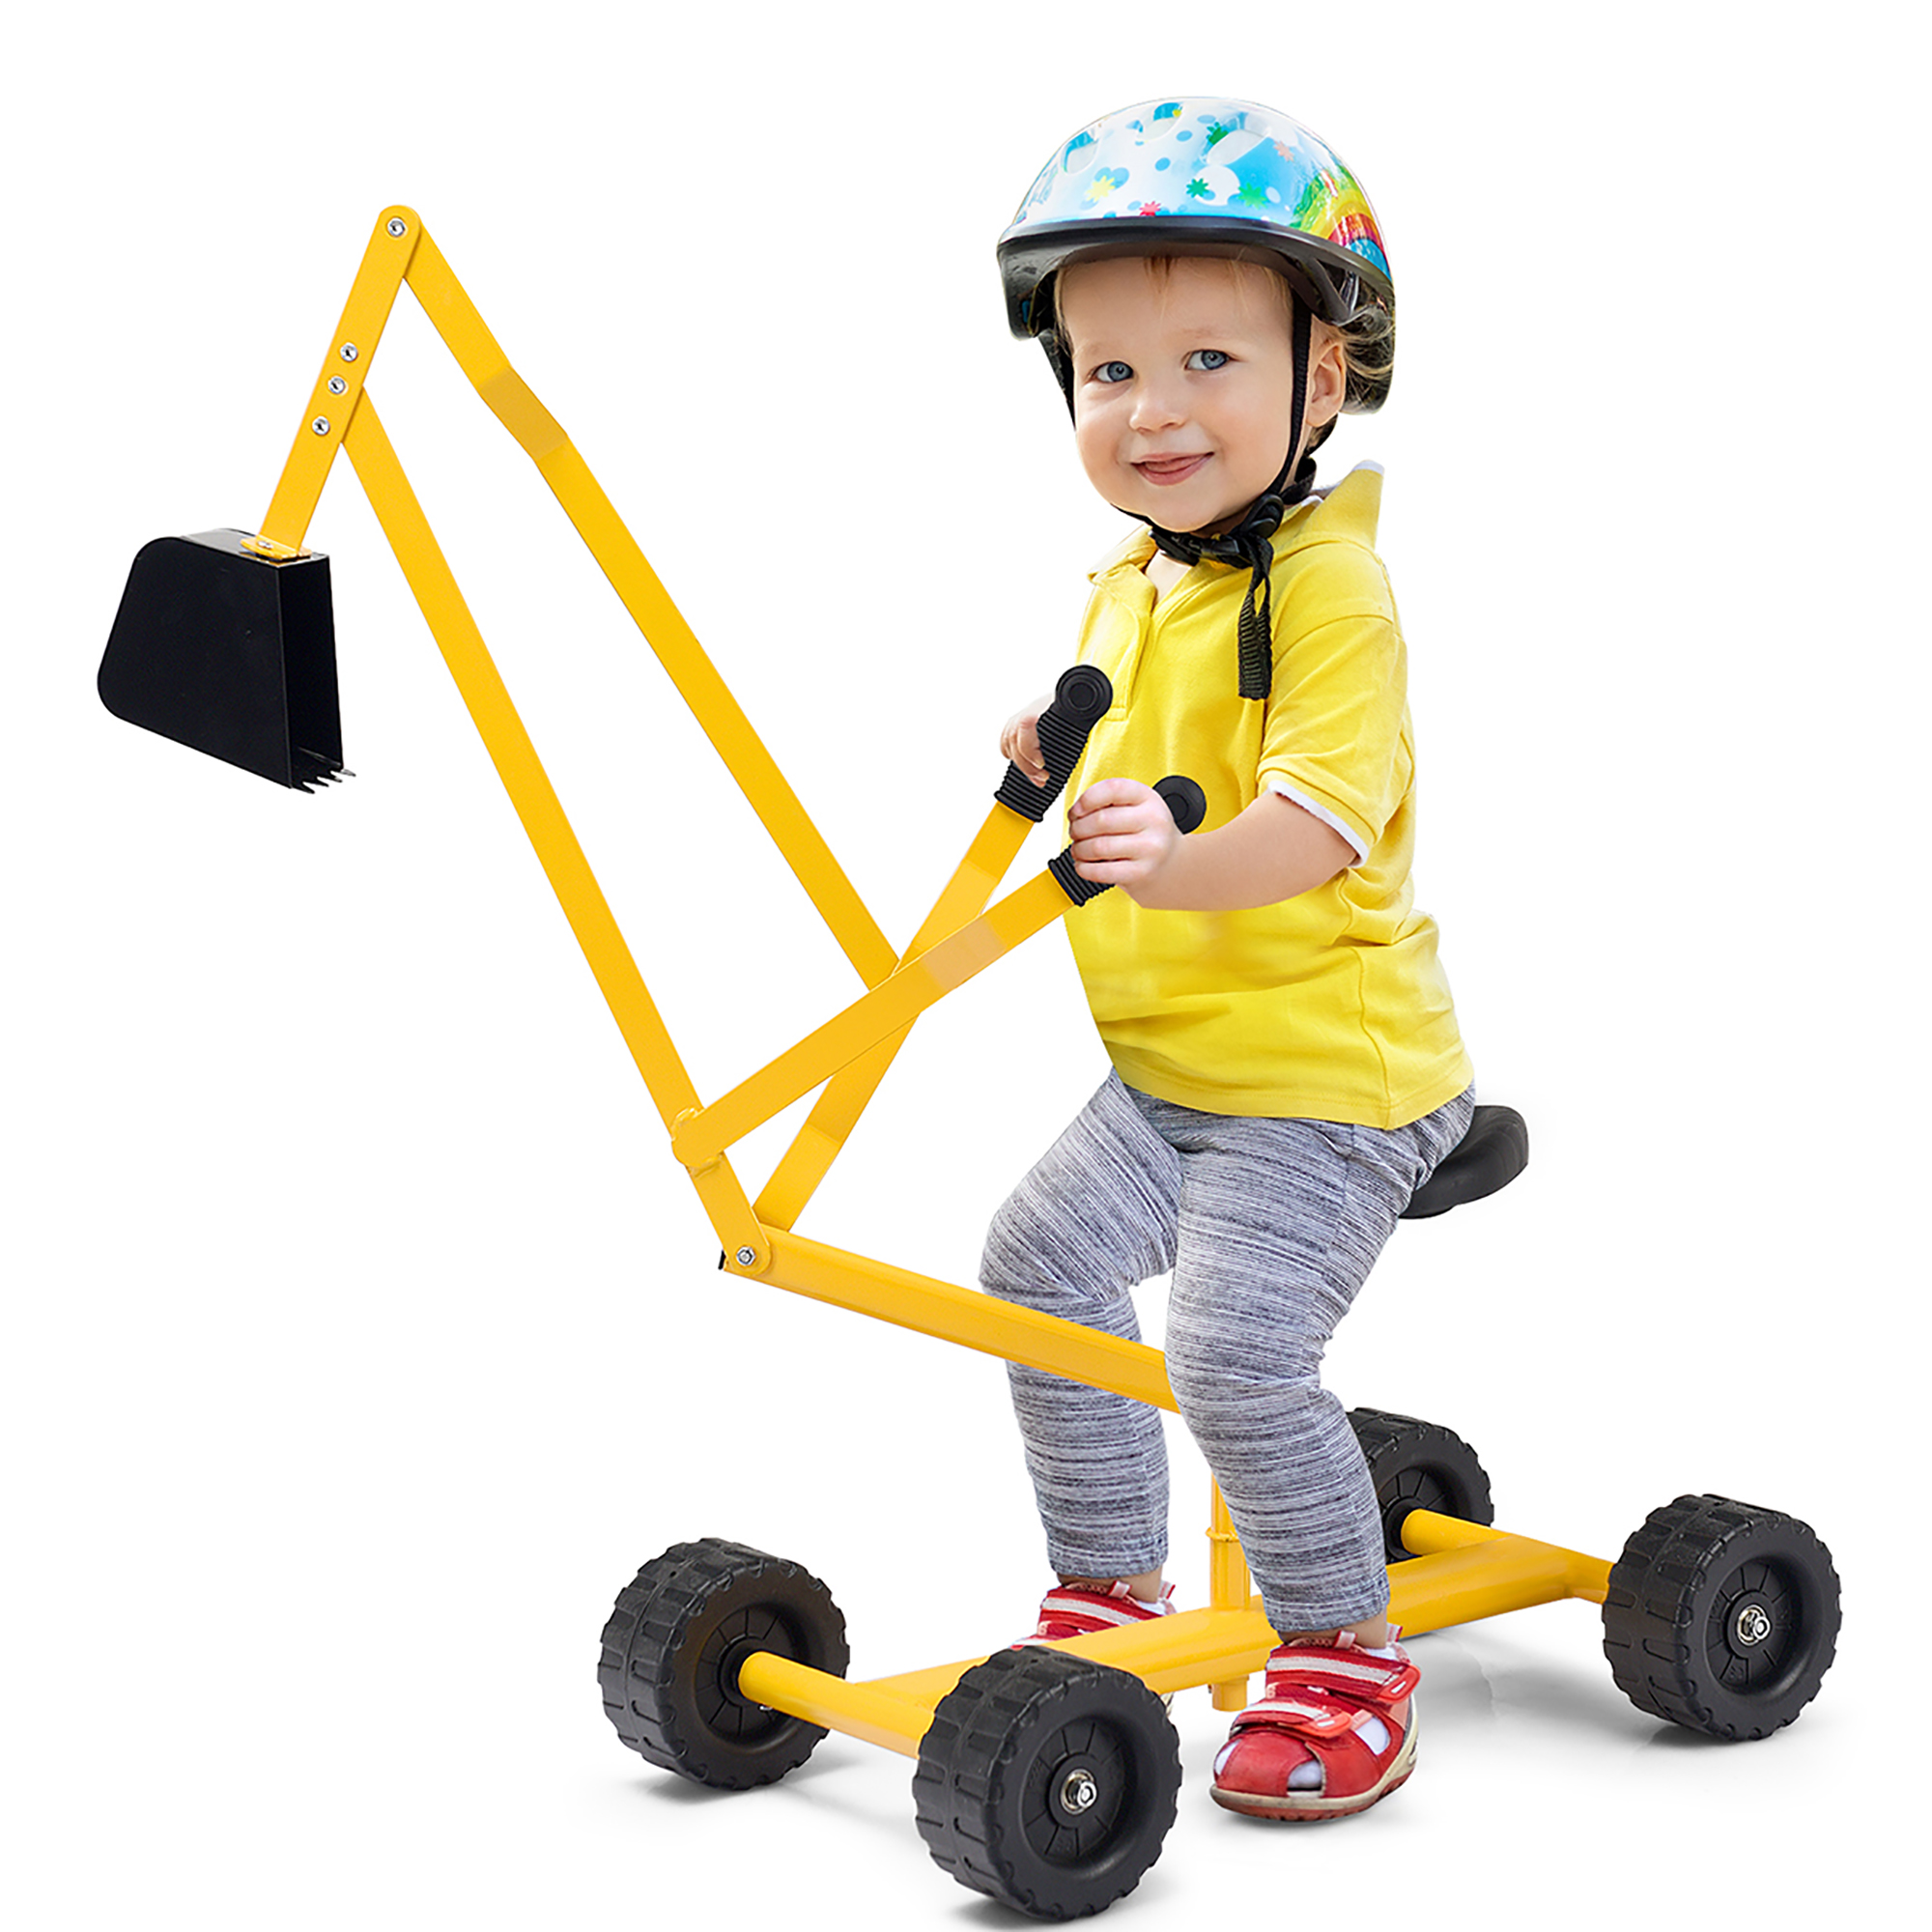 Costway Heavy Duty Kid Ride-on Sand Digger Digging Scooper Excavator for Sand Toy Yellow - image 1 of 7